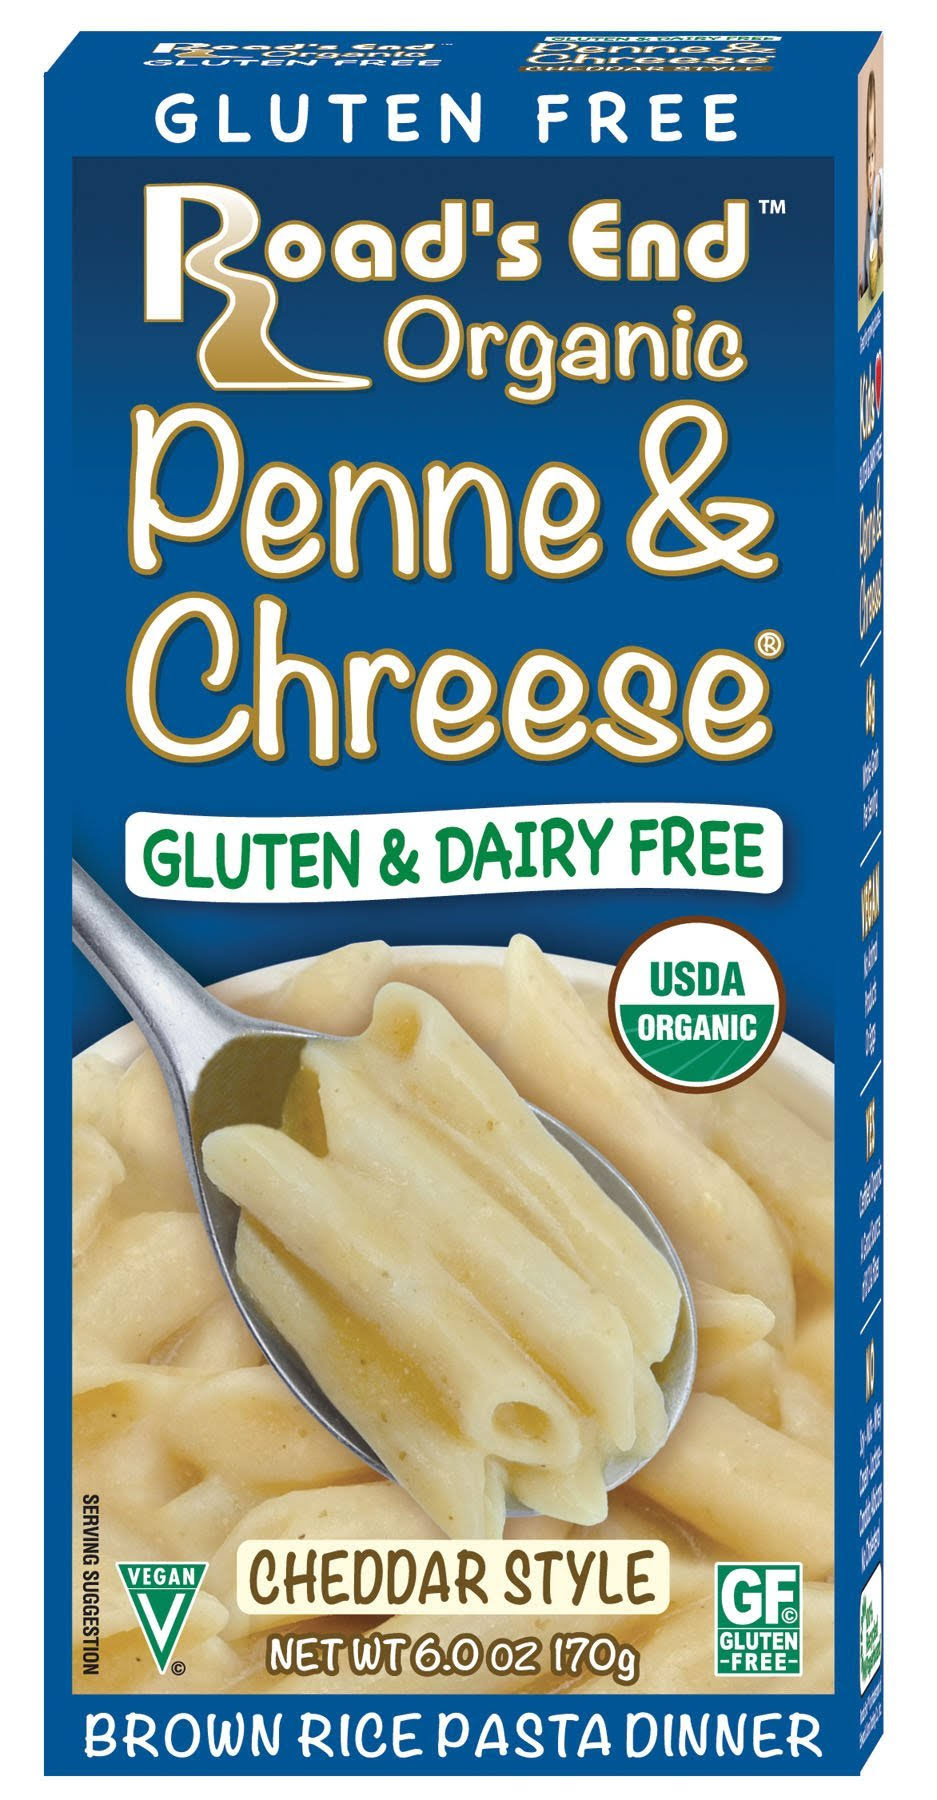 Road's End Organics Gluten Fee Cheddar Style Penne and Chreese - 6 oz